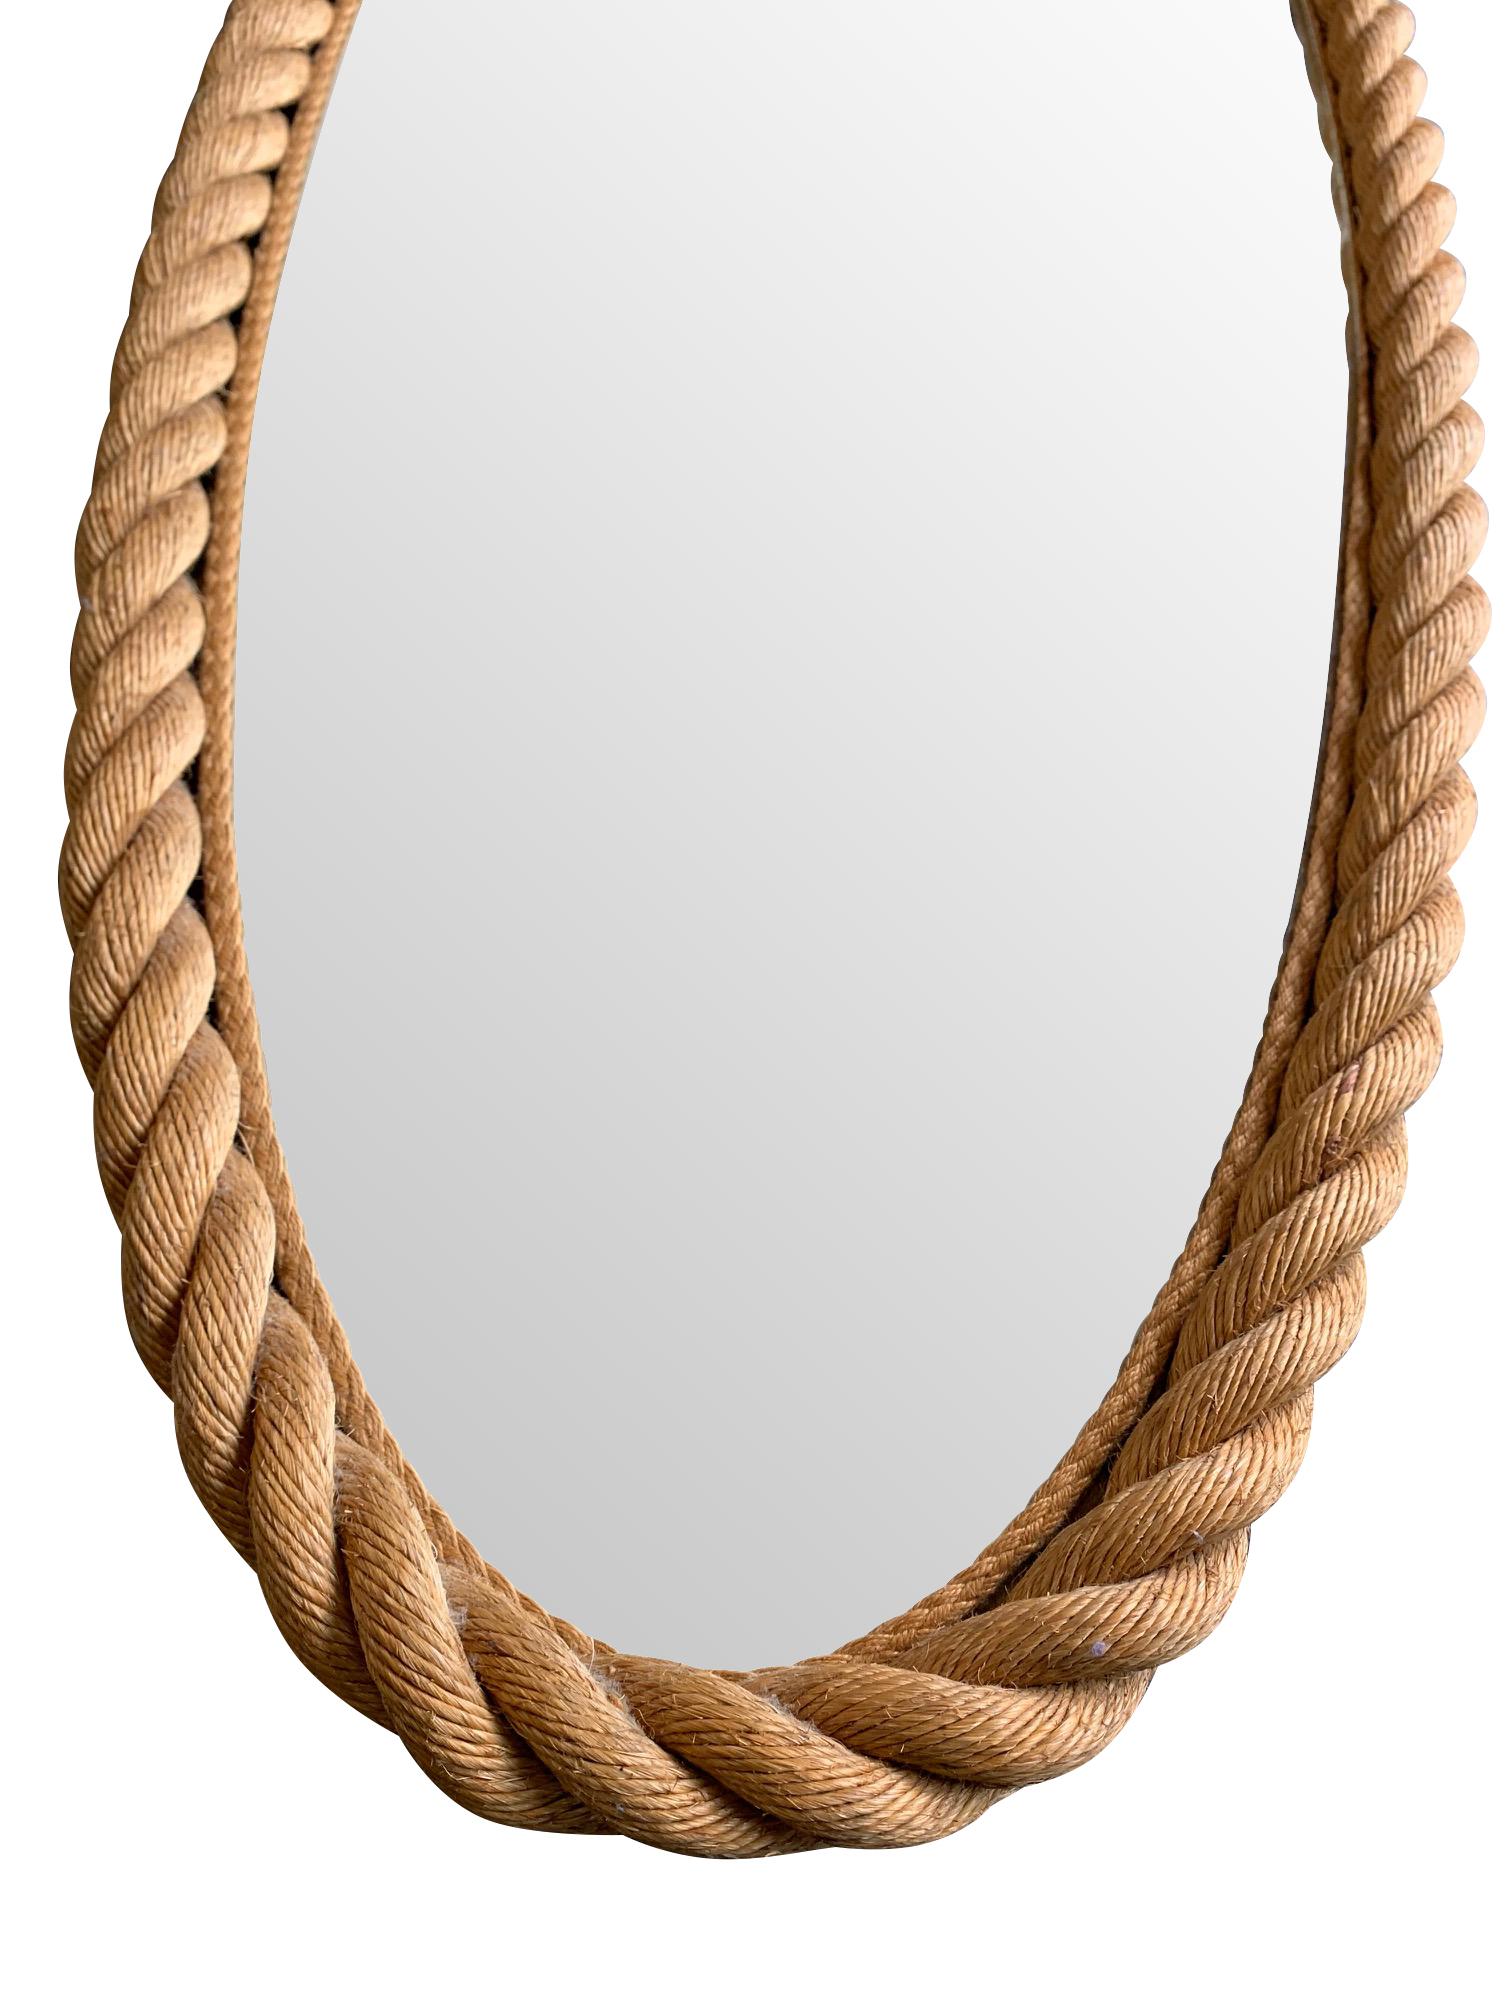 Mid-20th Century A Large 1950s French Riviera Oval Rope Mirrors by Audoux and Minet